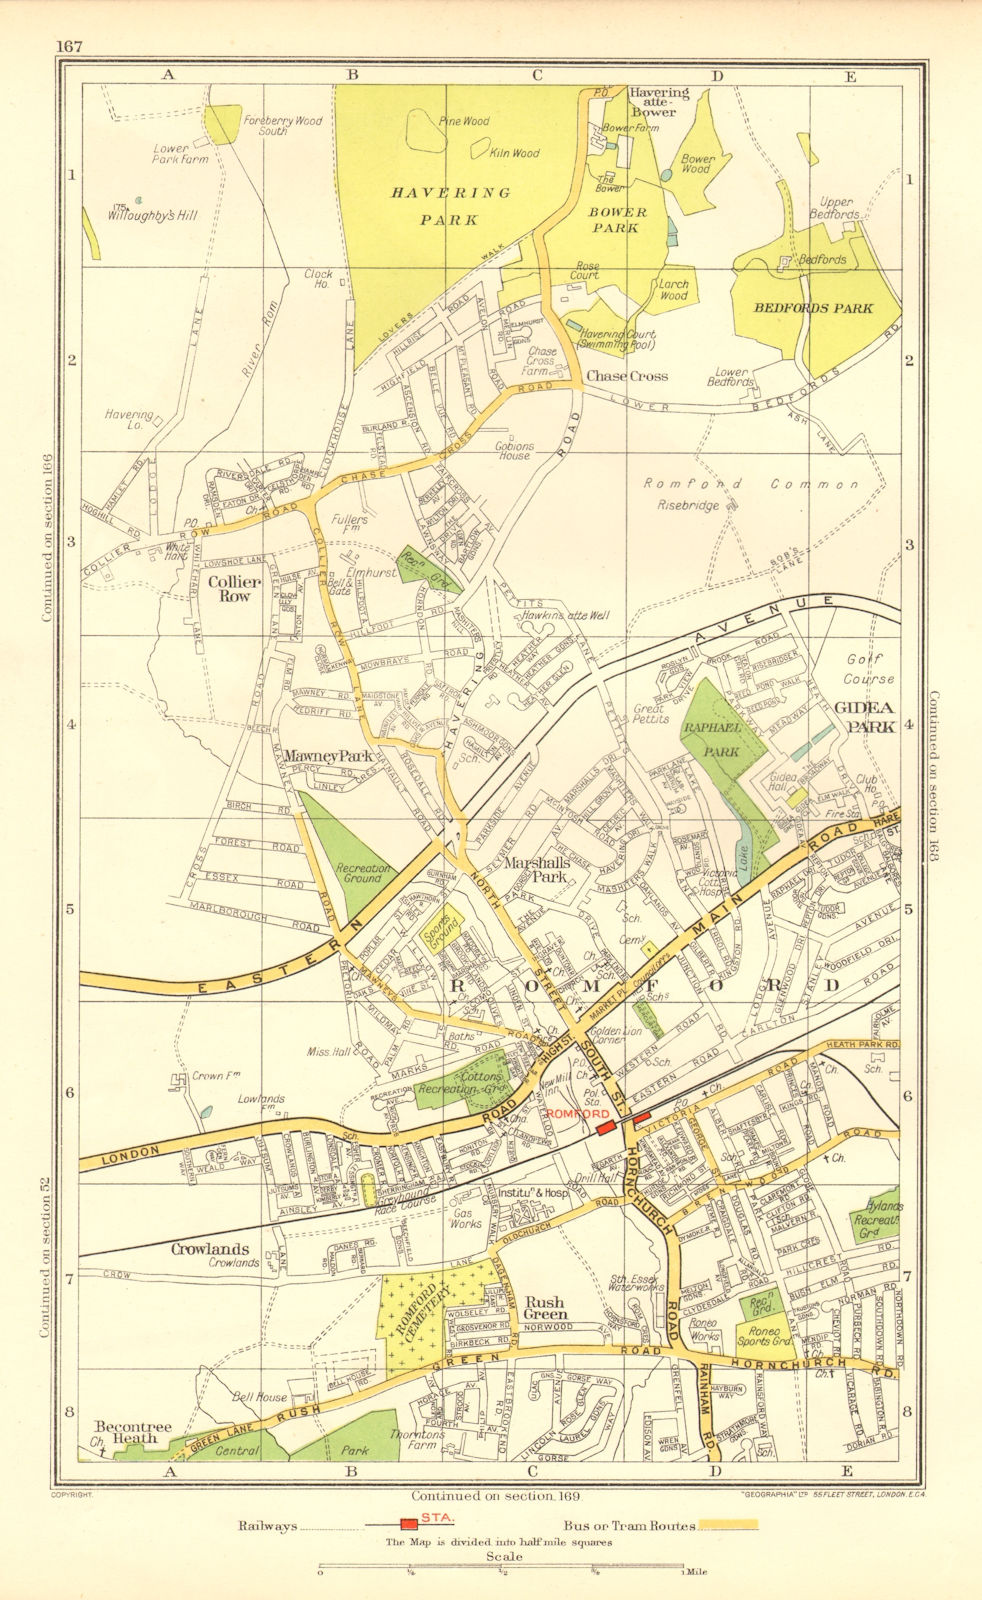 ROMFORD. Collier Row Rush Green Havering-atte-Bower Rise/Gidea Park 1937 map